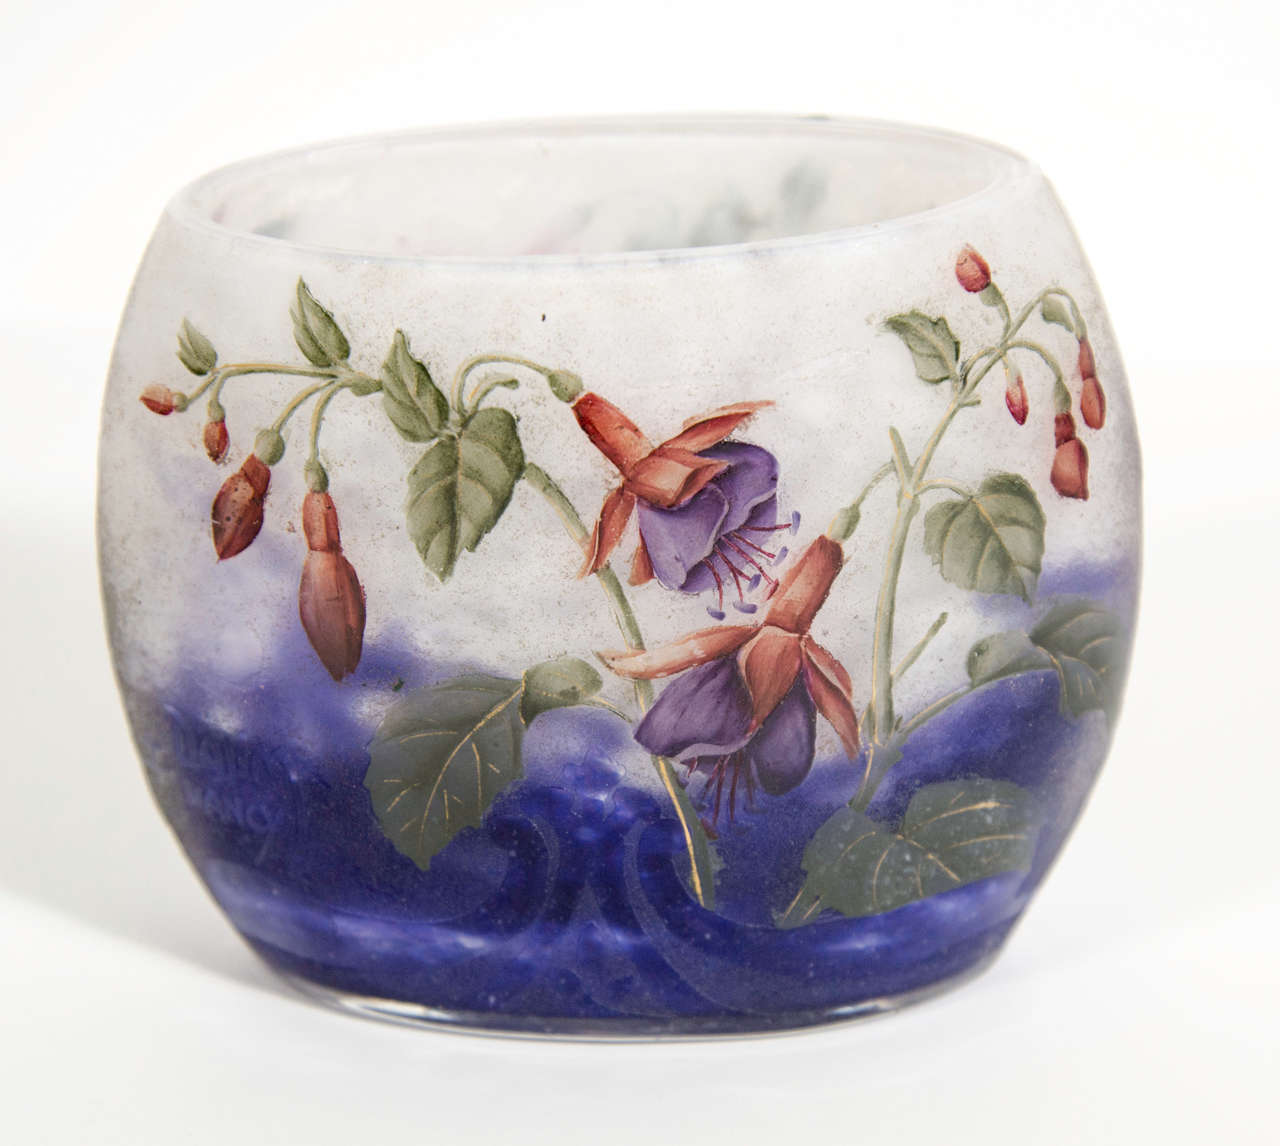 Art Nouveau double-overlaid and acid etched glass vase adorned with Fuchsia Magellanica blossoms signed by the prestigious Nancy Daum. Works by Daum, especially of such superior craftsmanship, are highly collectible and increasingly scarce. Cameo